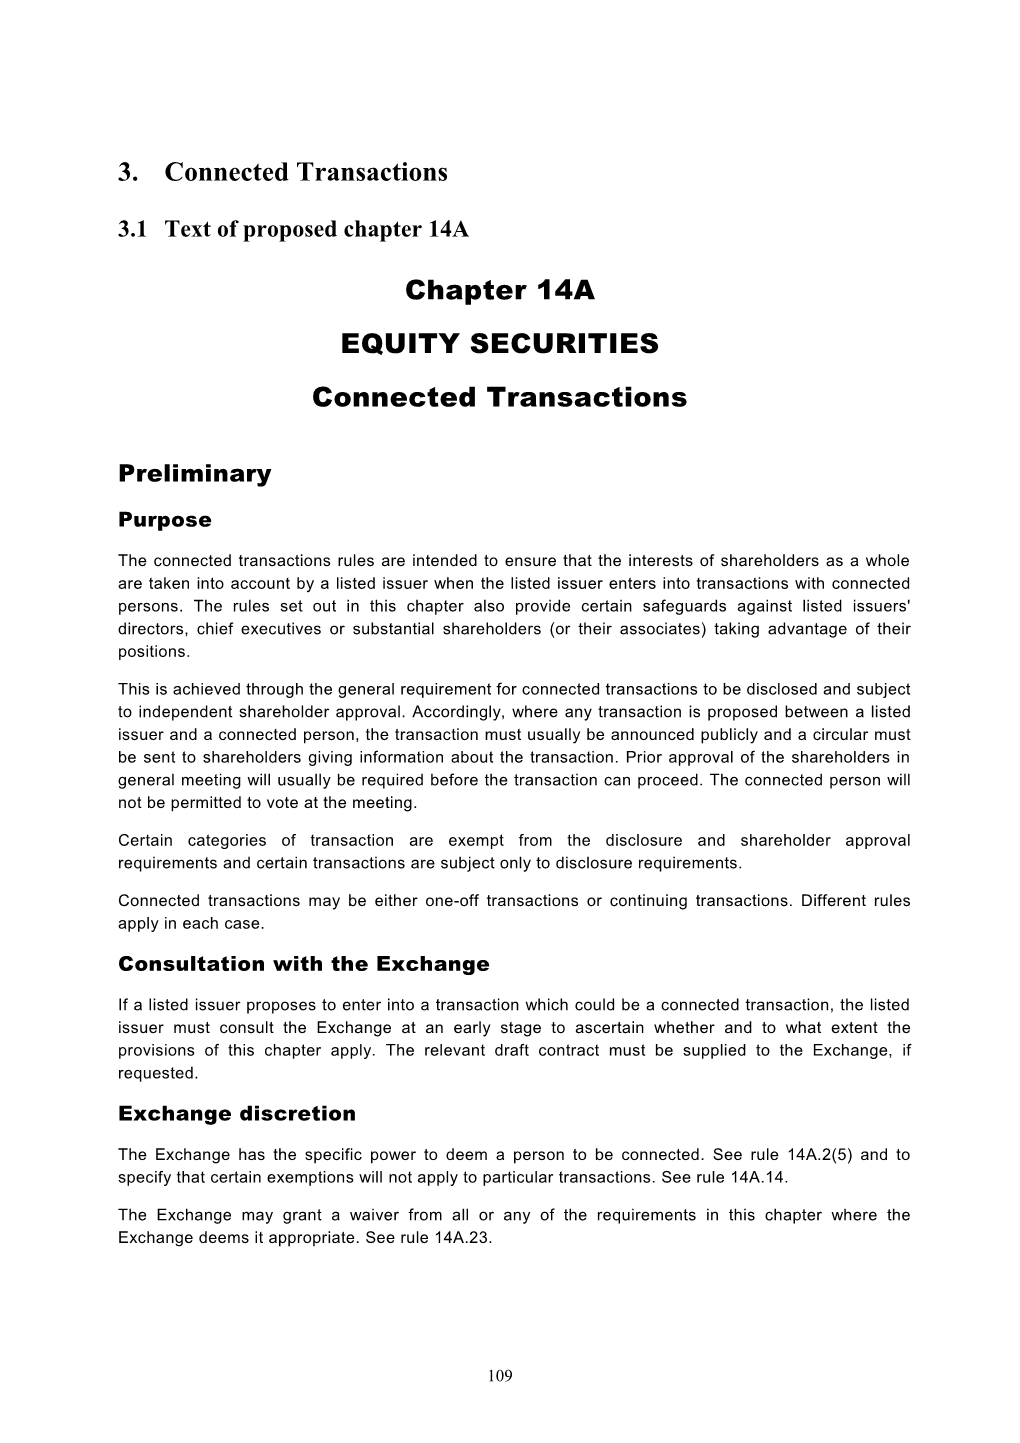 3.Connected Transactions